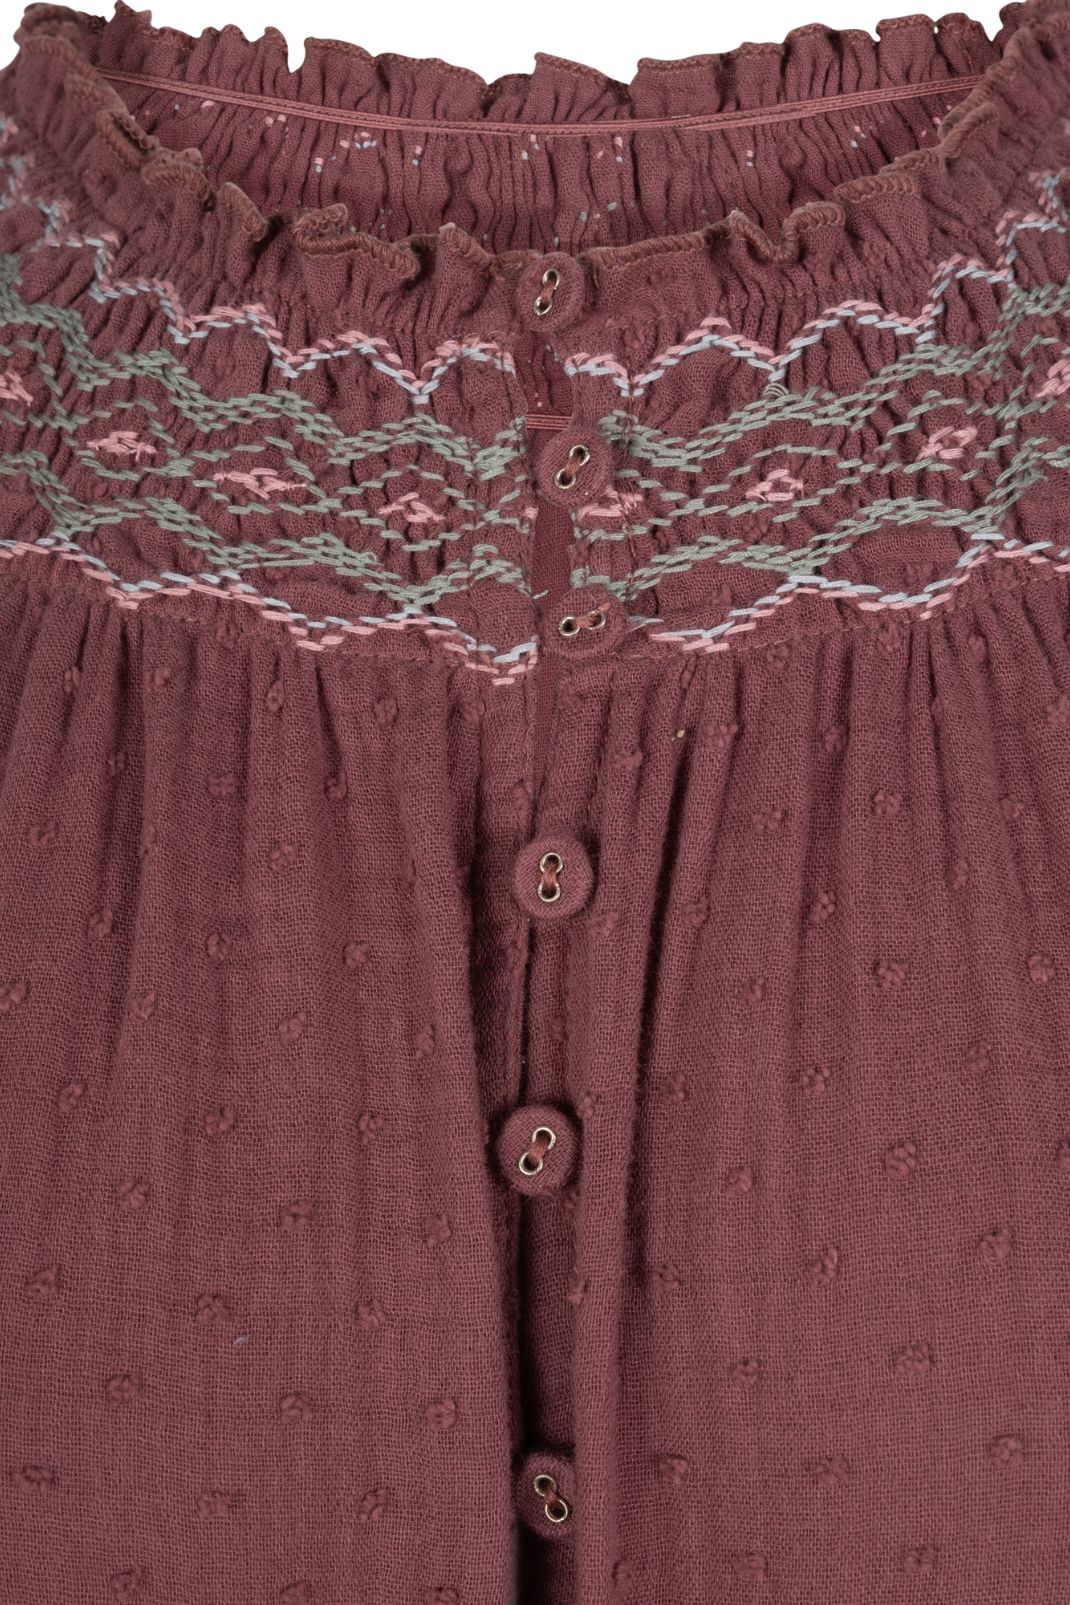 Detailed product shot of the Lucy Dress in Vintage Wine